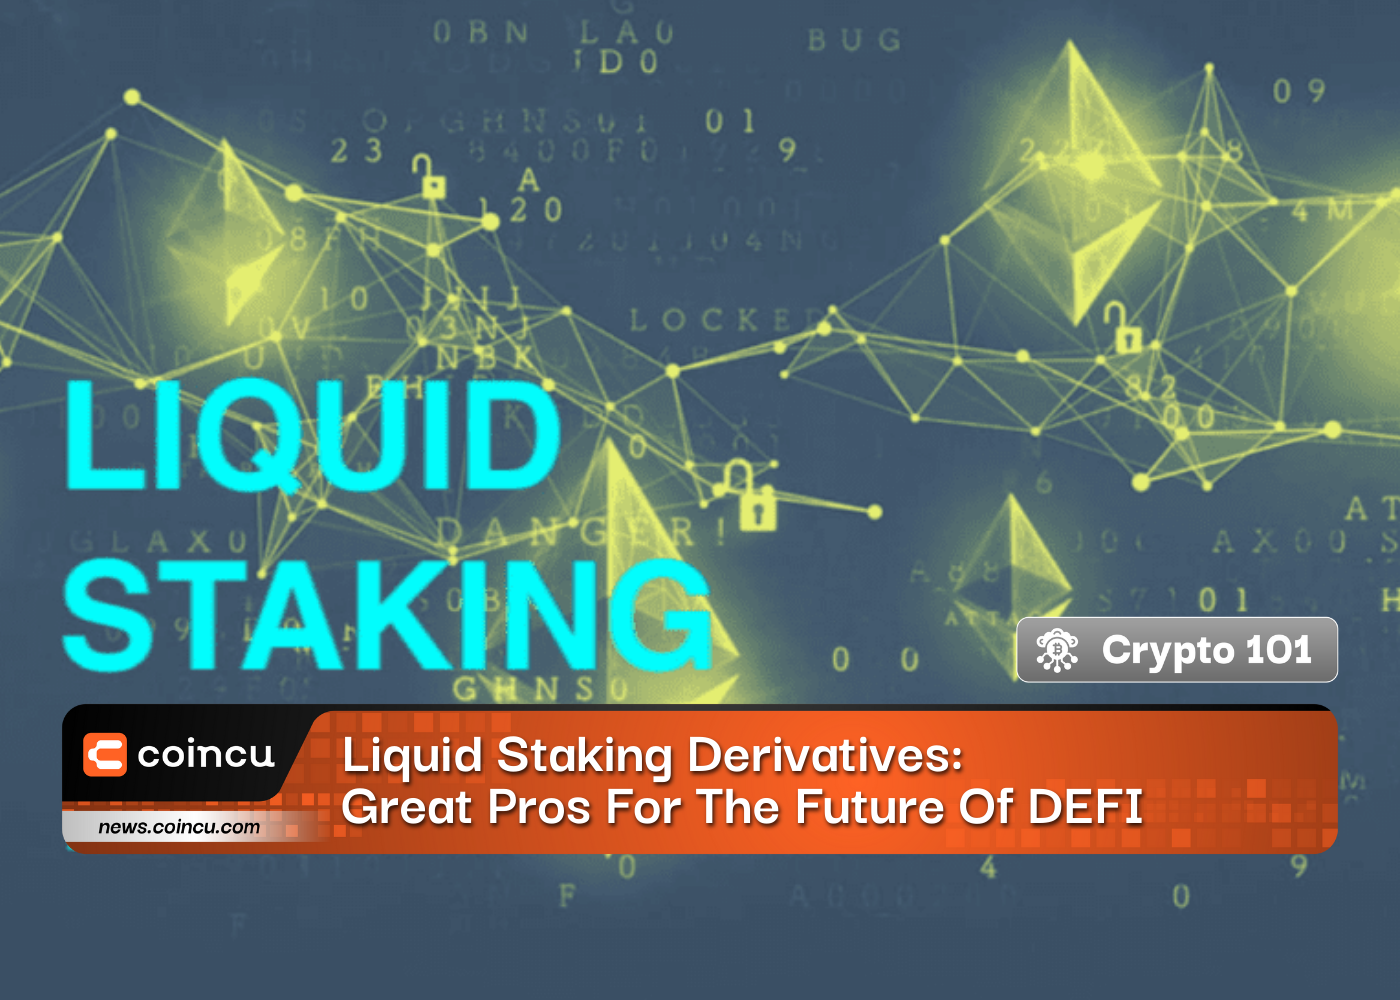 Liquid Staking Derivatives: Great Pros For The Future Of DEFI